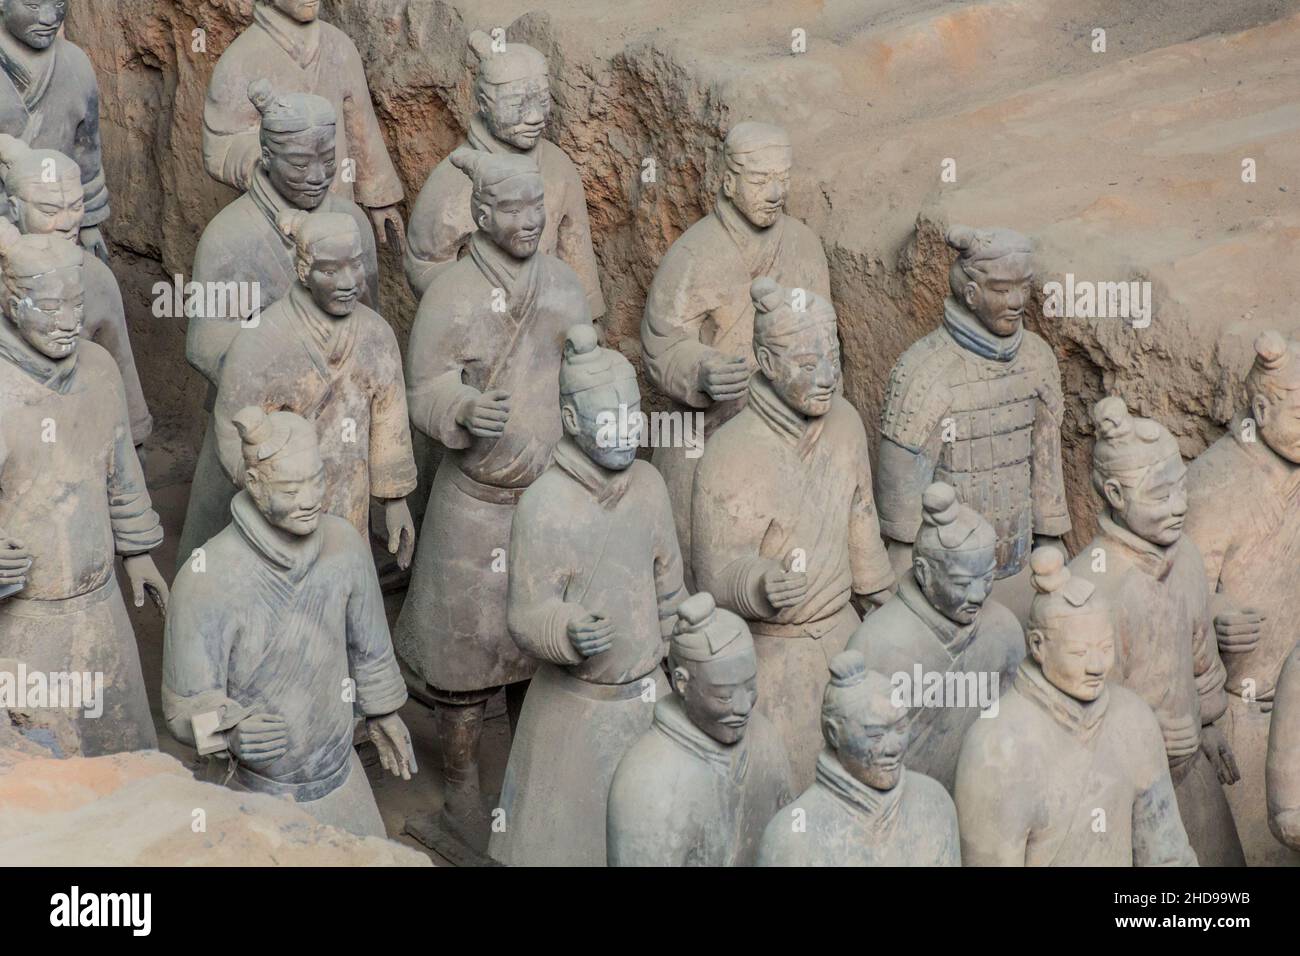 XI'AN, CHINA - AUGUST 6, 2018: Soldiers in the Pit 1 of the Army of Terracotta Warriors near Xi'an, Shaanxi province, China Stock Photo